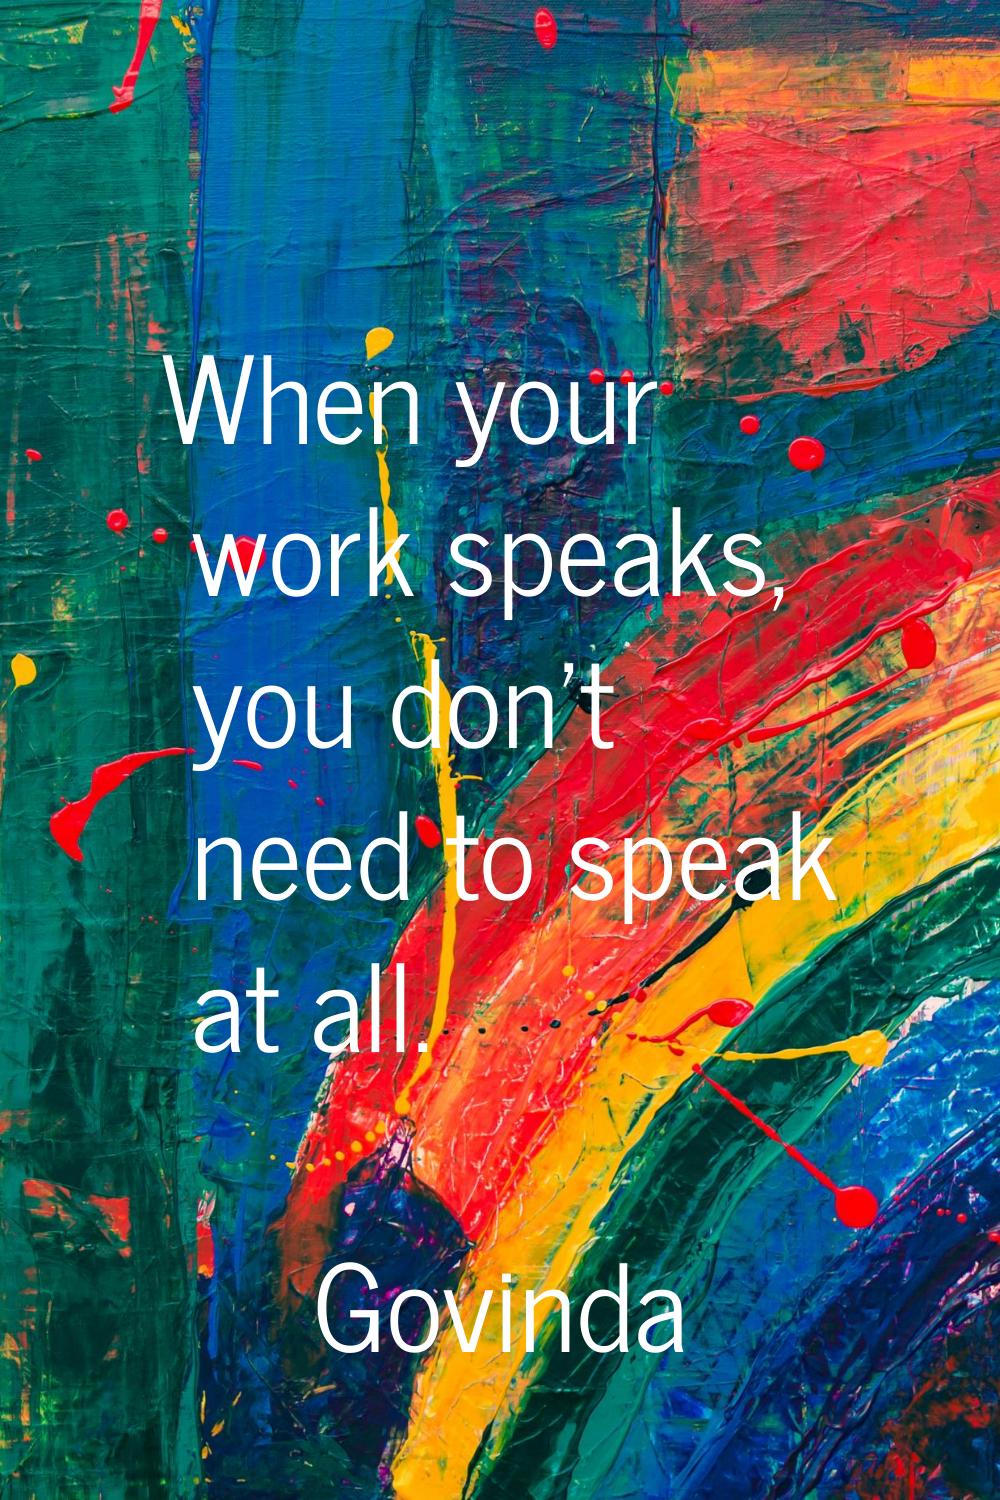 When your work speaks, you don't need to speak at all.